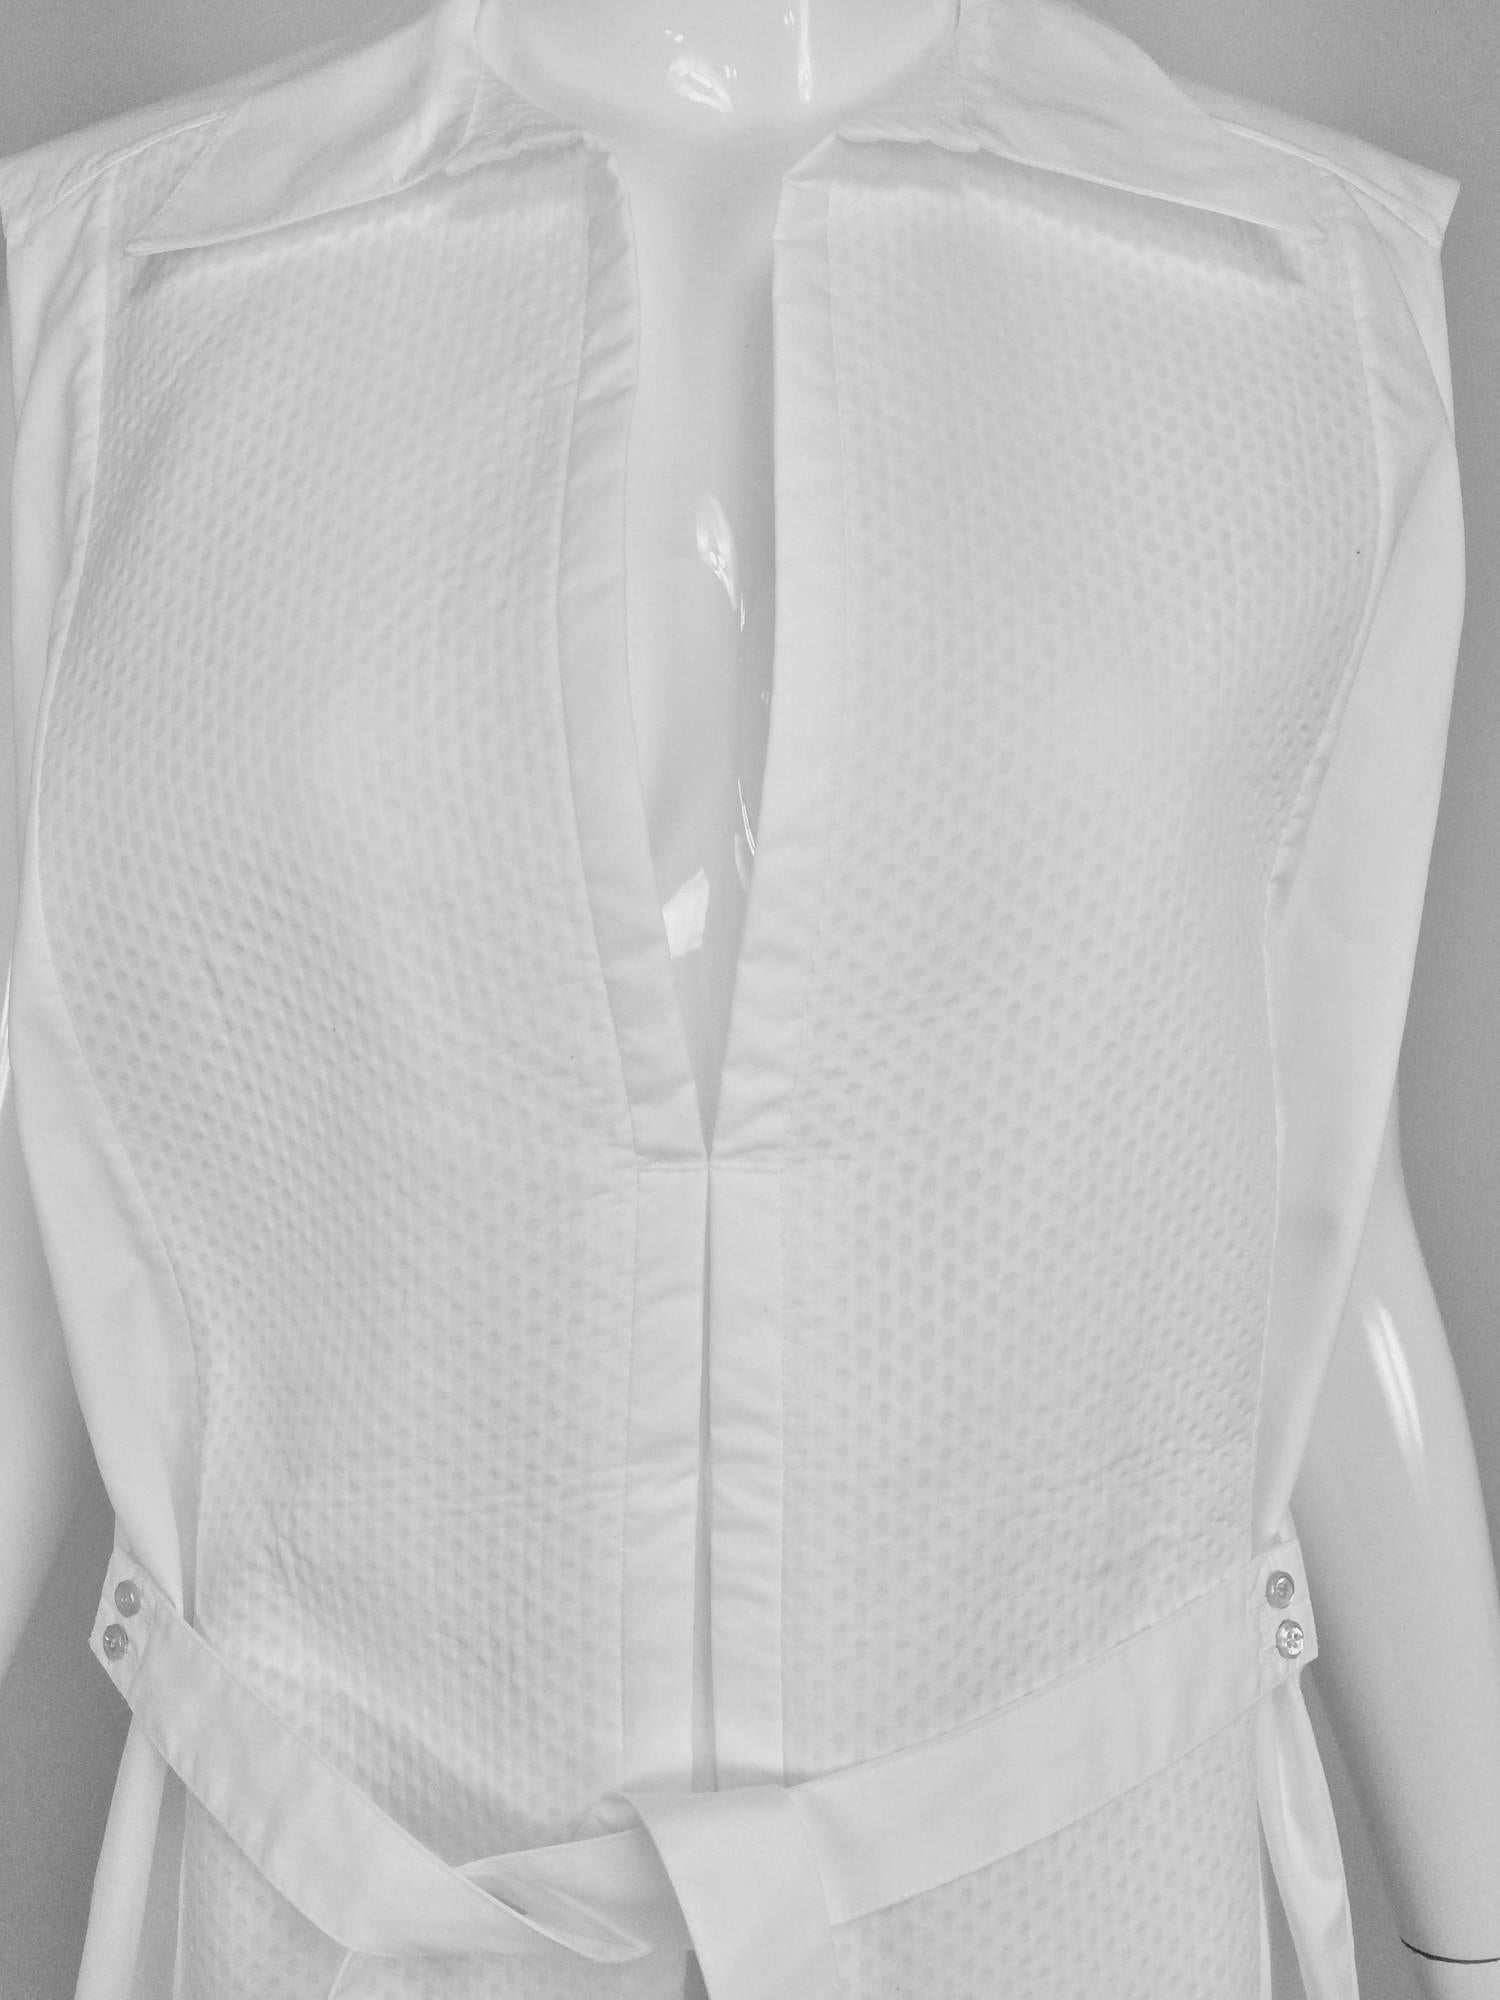 Balenciaga sleeveless white cotton pique belted tunic 38...Sleeveless tunic with wing collar, pique bib front that is cut very deeply with an inverted pleat below...Below hip length the tunic is loose fitting...Button on ties at each side